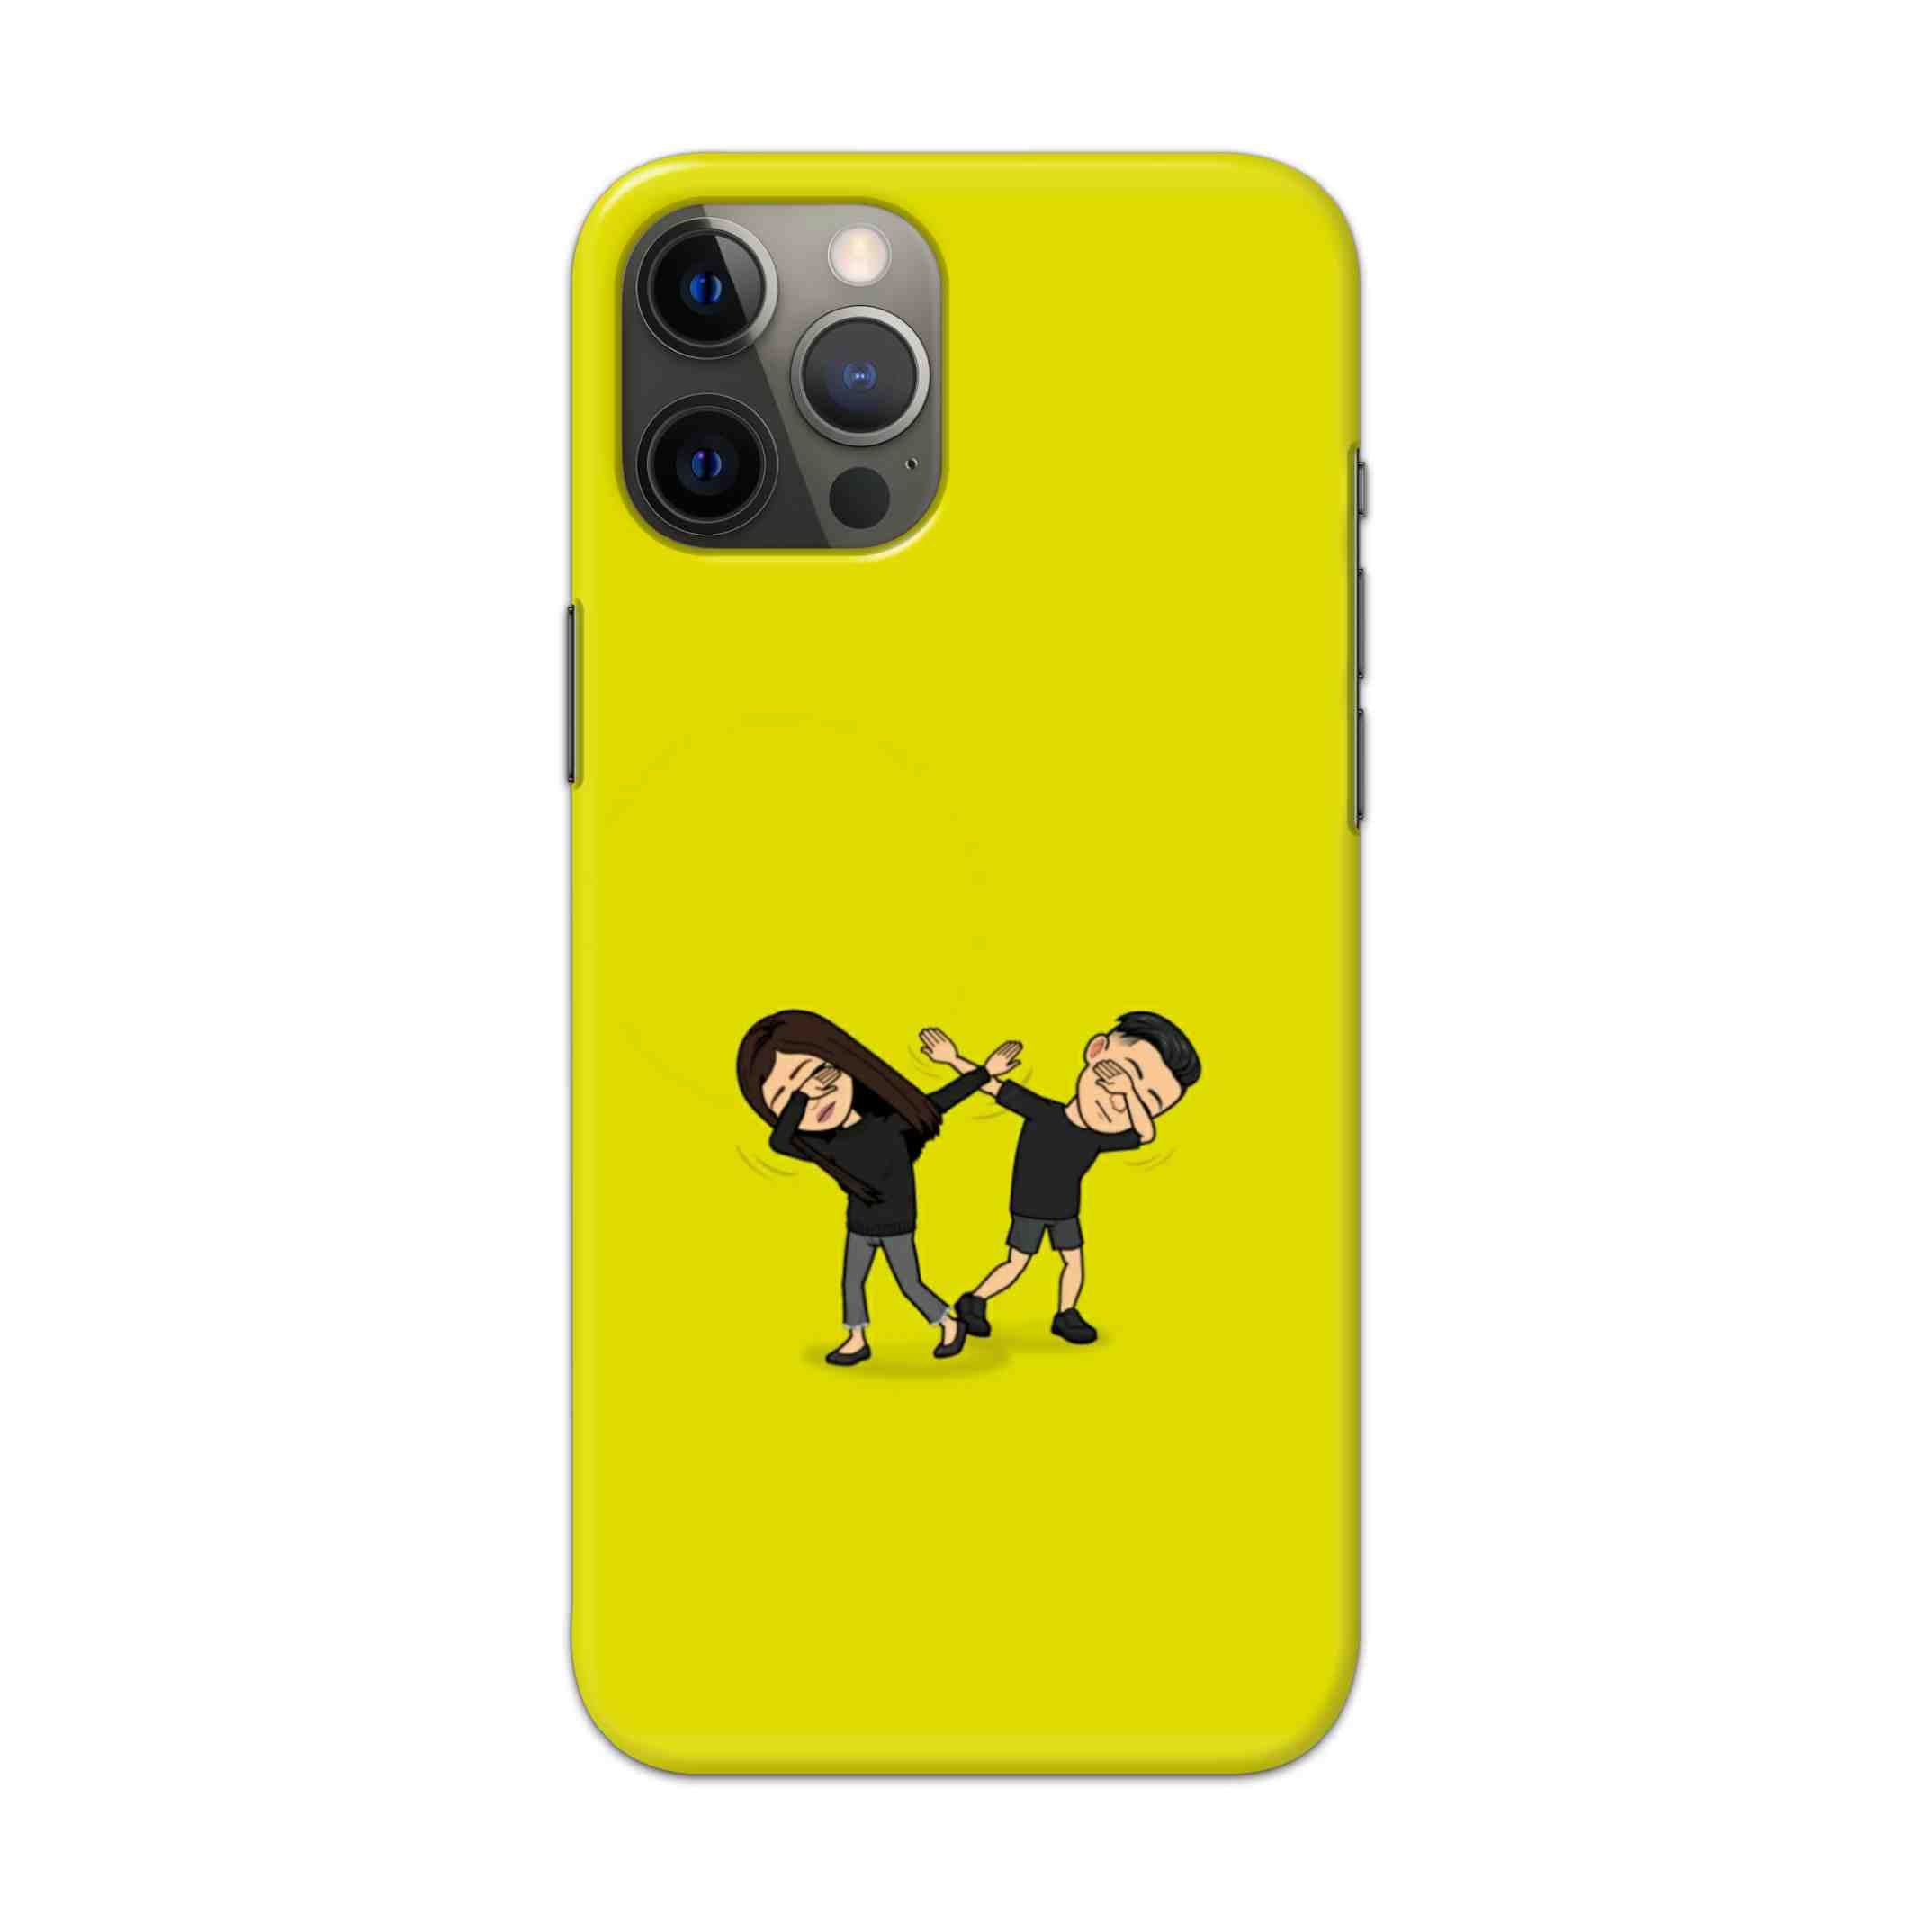 Buy Swag Couple Hard Back Mobile Phone Case Cover For Apple iPhone 12 pro Online